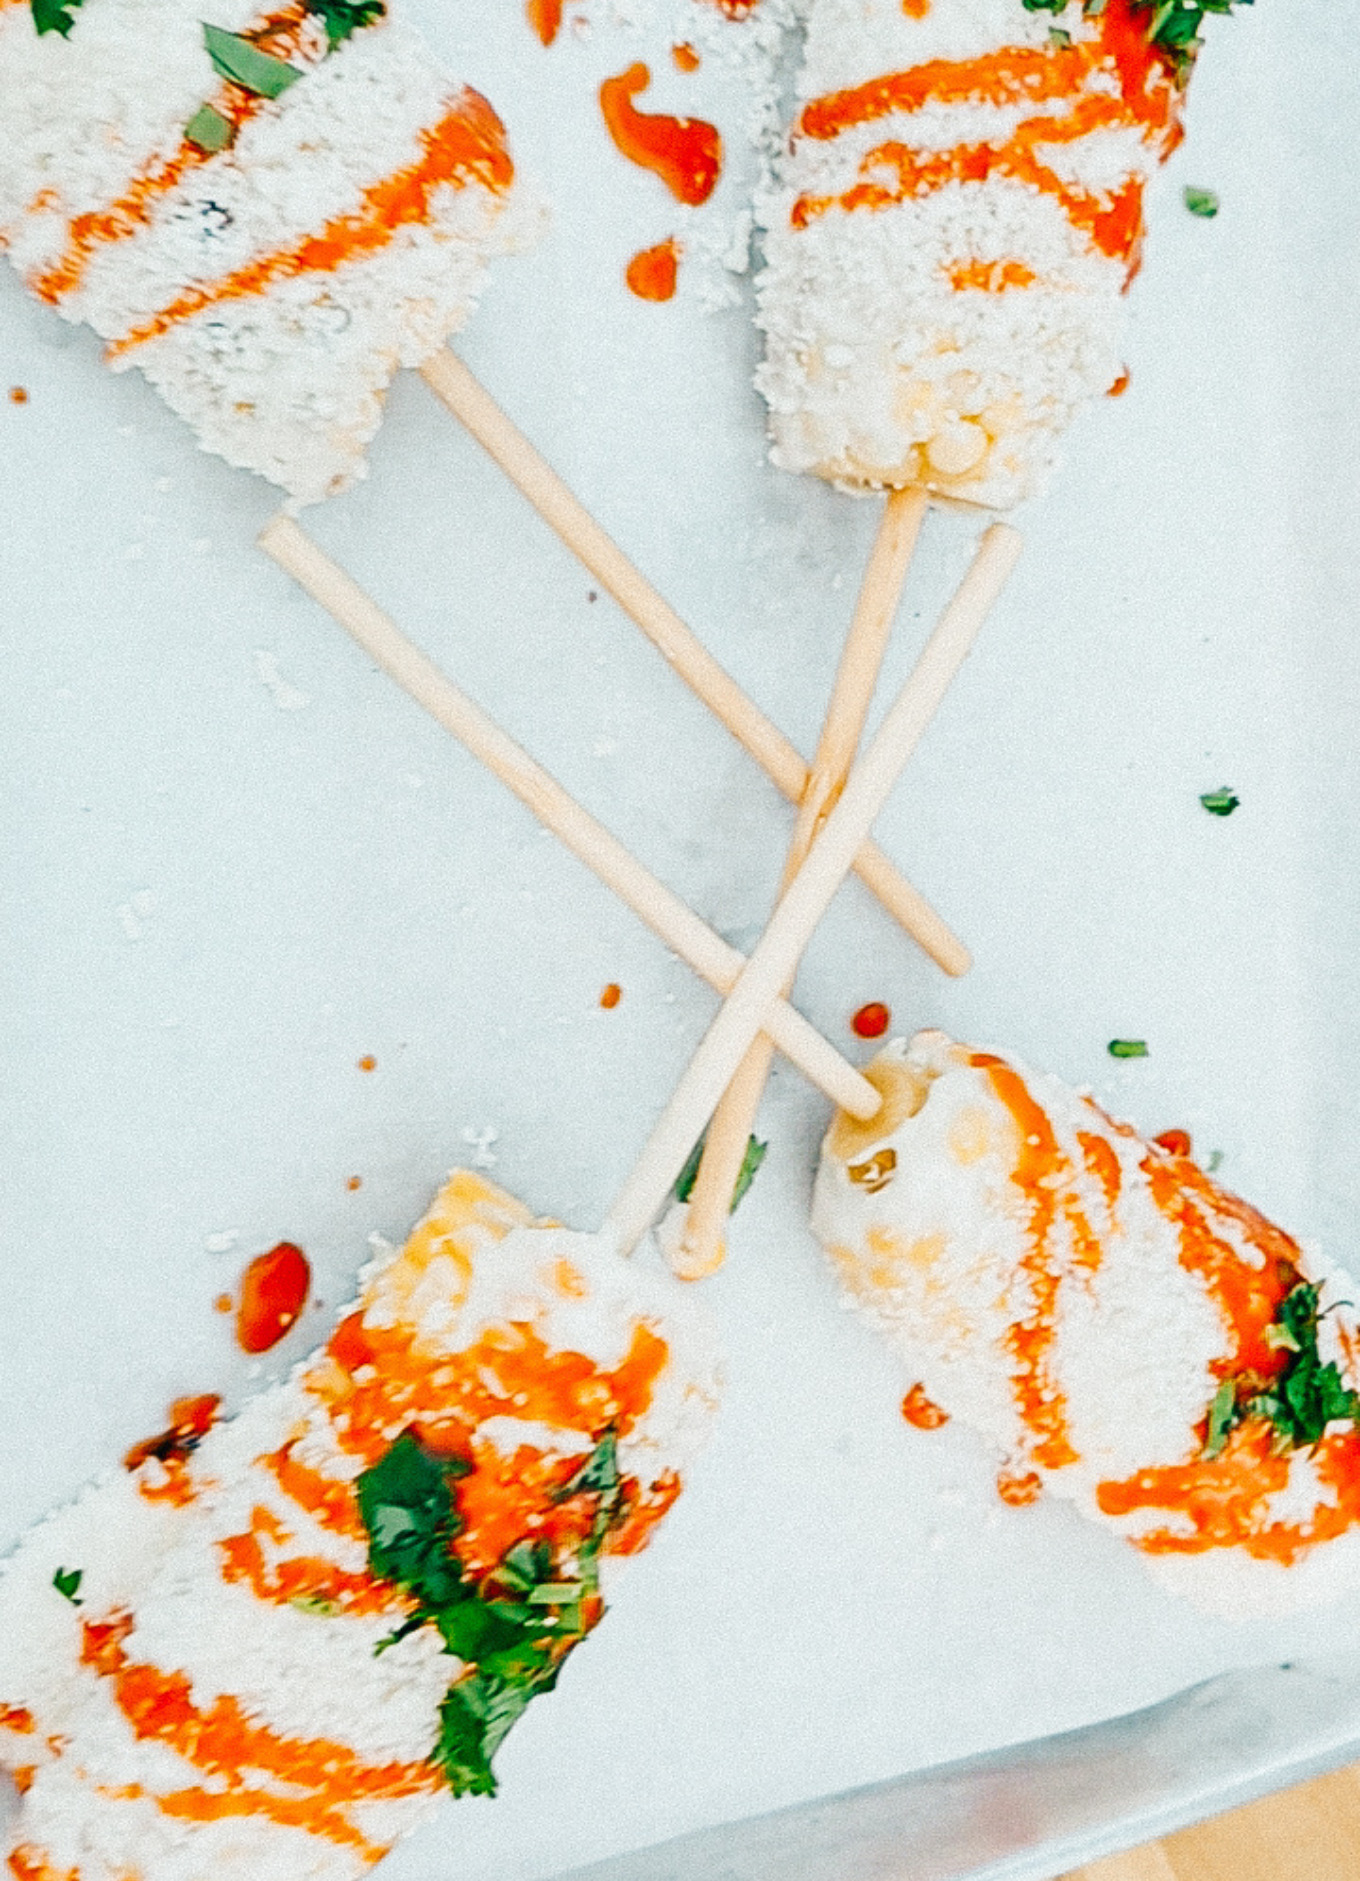 Mexican Street Corn on a stick.